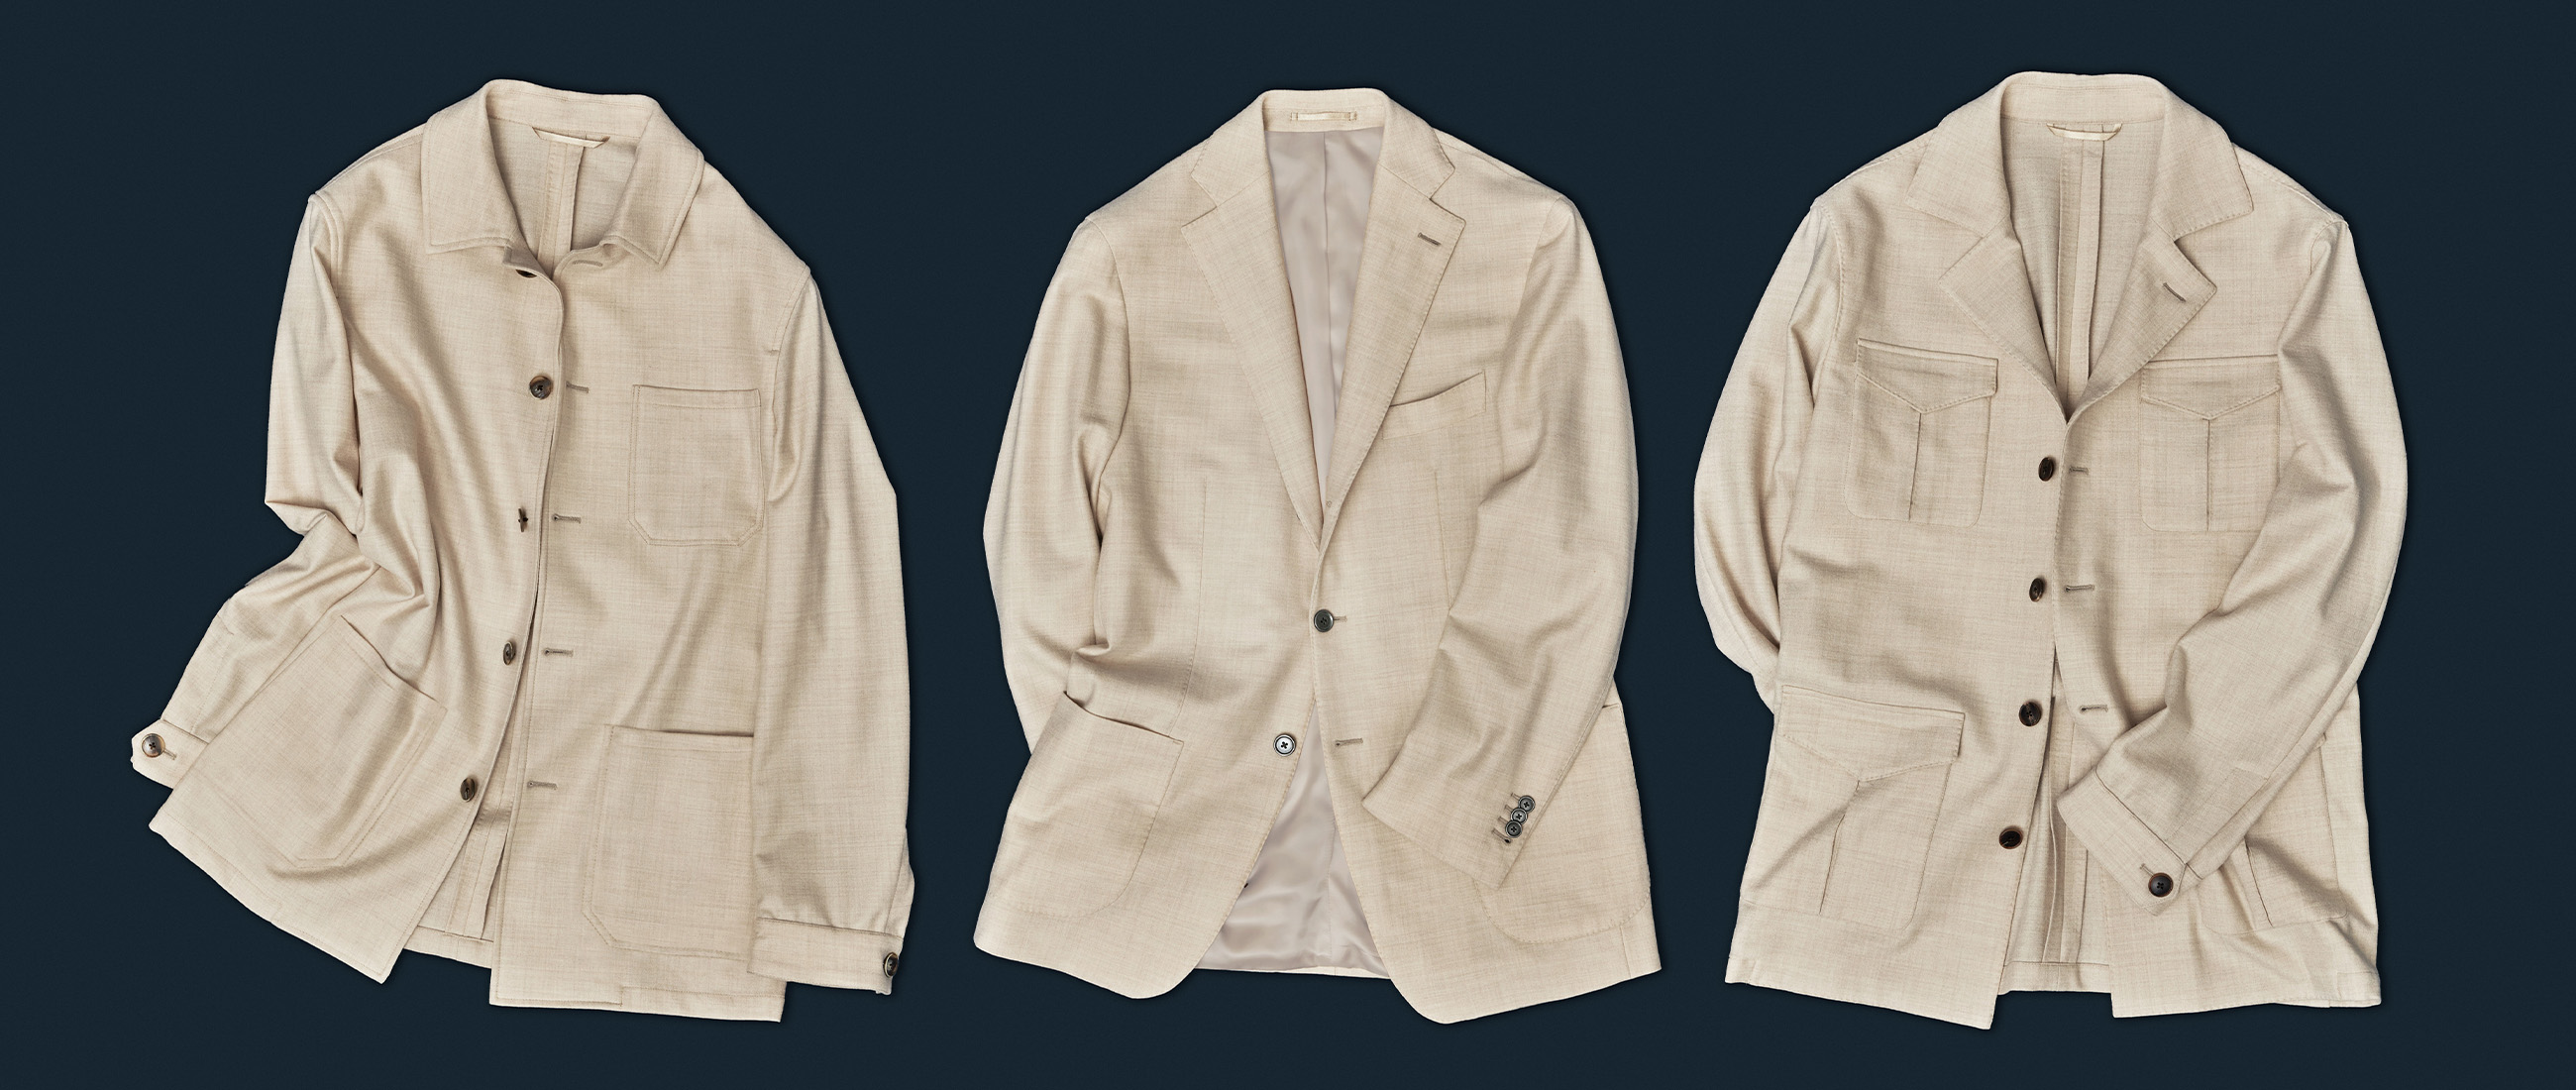 Layers of softness: Soft tailoring for the office explained